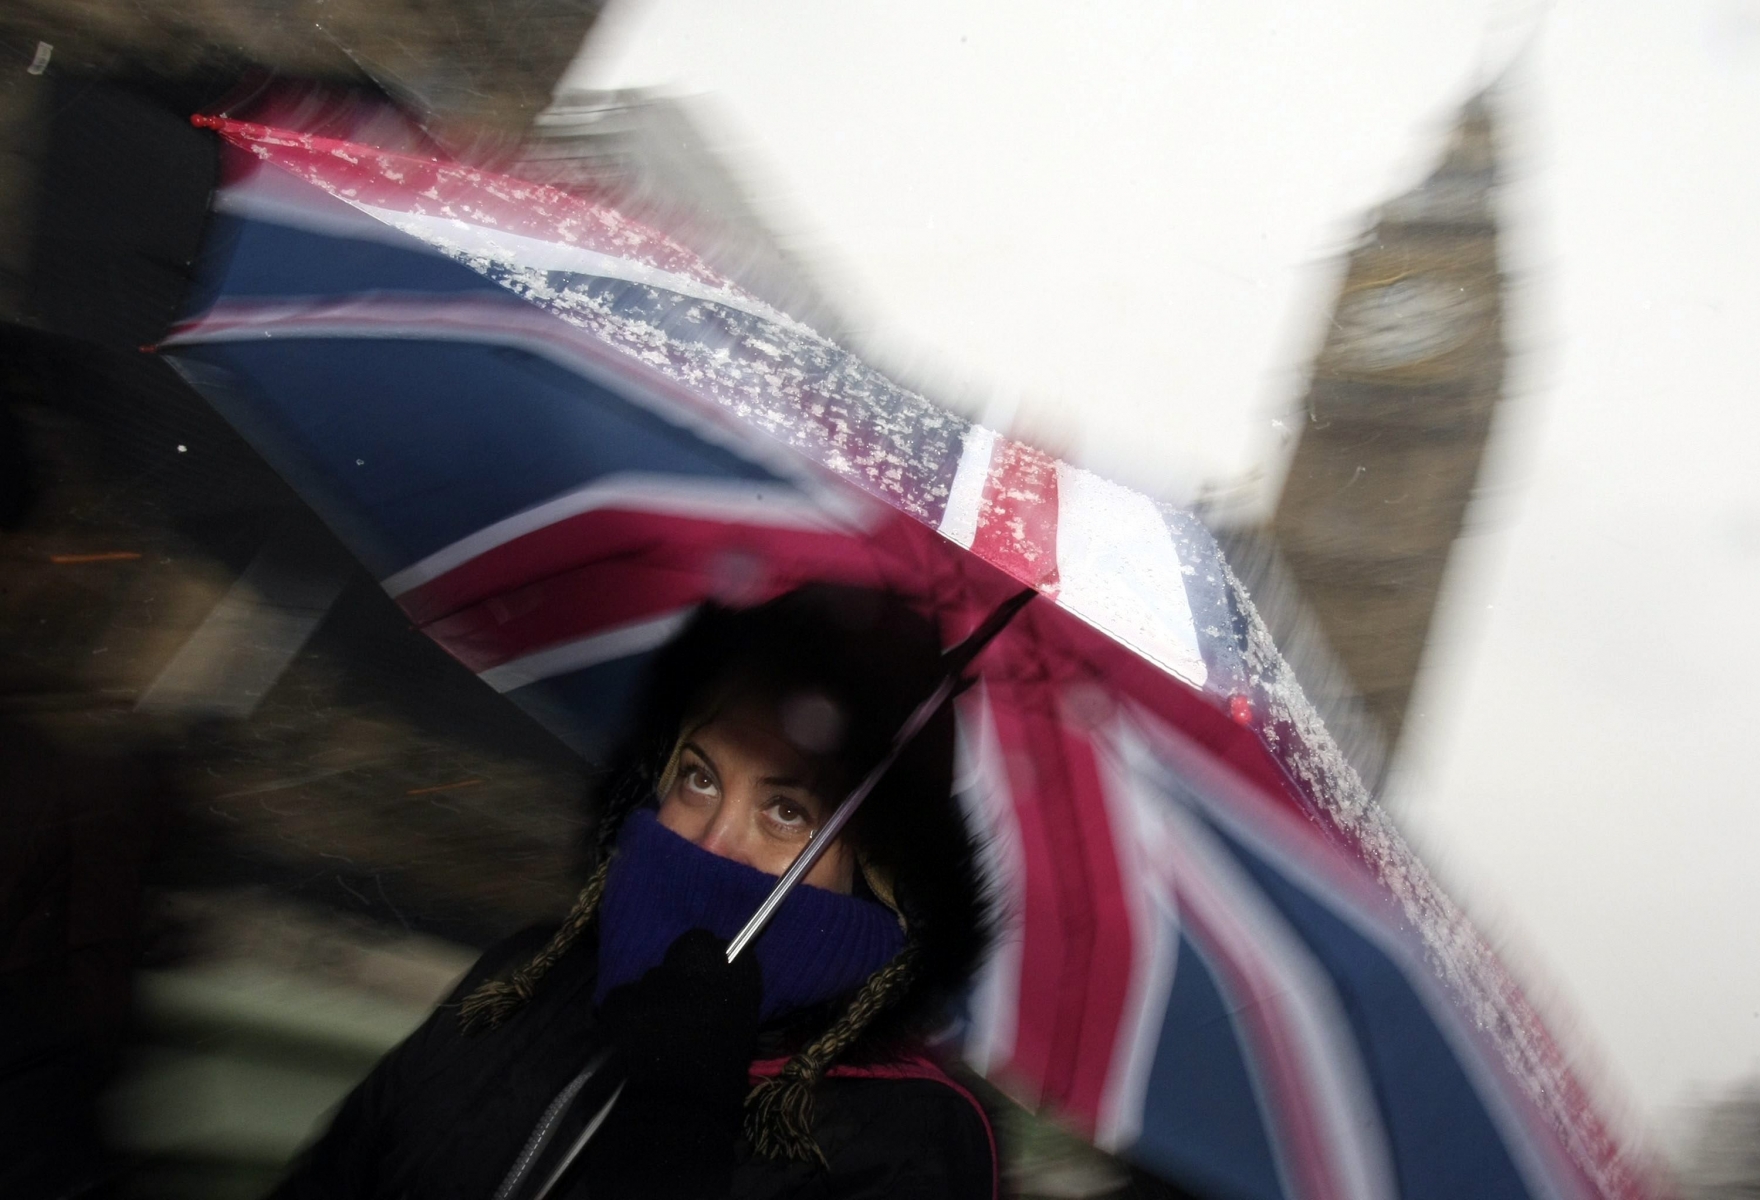 A woman shelters under a Union flag umbrella near the Houses of Parliament, during heavy snow in London, Wednesday, Jan. 6, 2010. Airports and highways were shut, hundreds of schools had to close, and even filming of the venerable television soap opera "Coronation Street" was disrupted as the worst snow and icy weather in years swept Britain. (KEYSTONE/AP Photo/Alastair Grant) Britain Weather